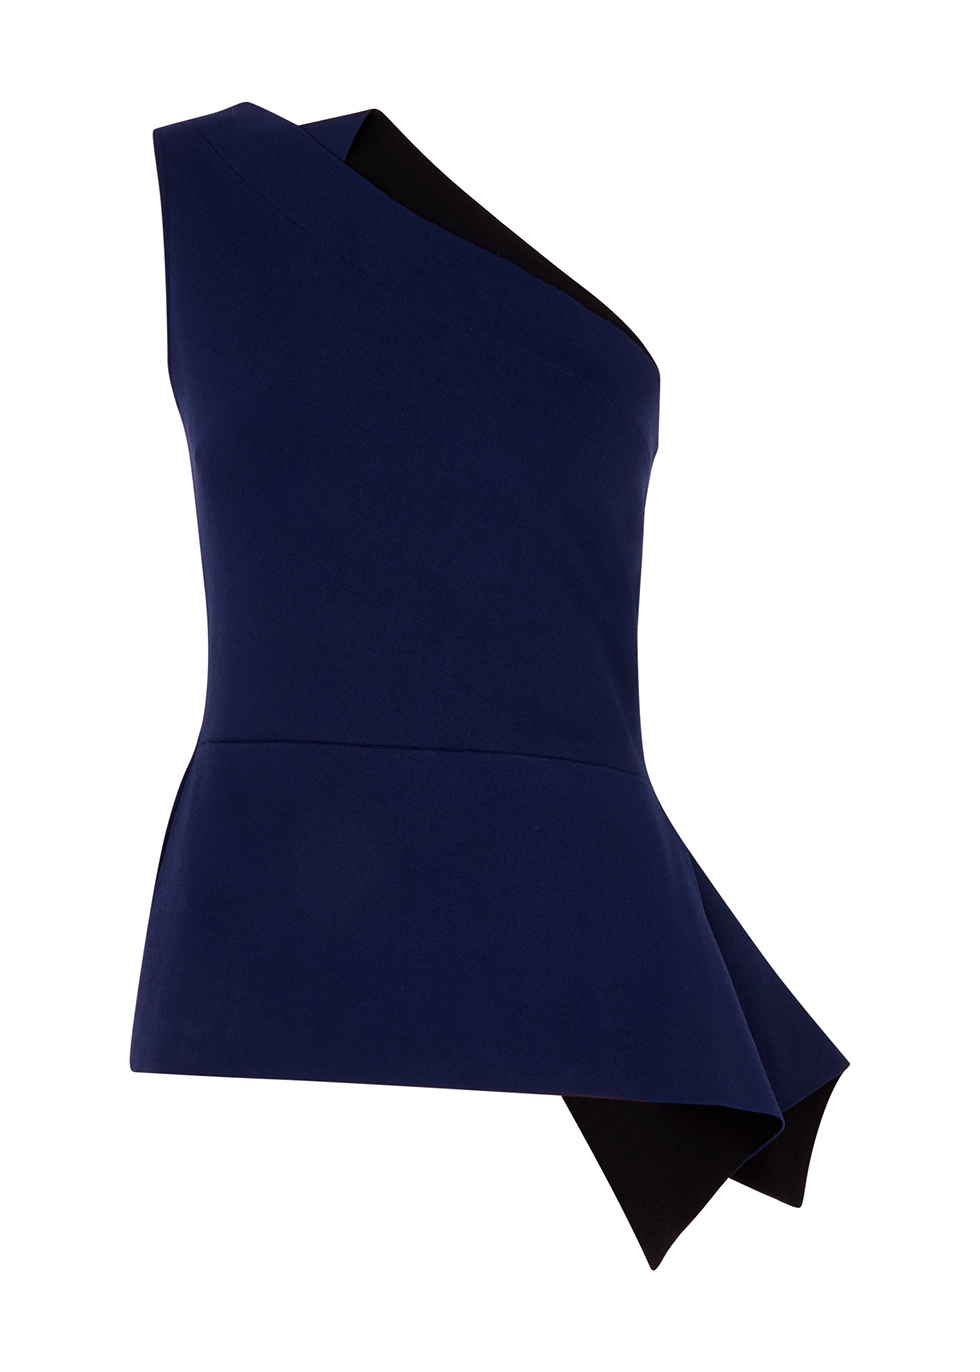 Olympia navy one-shoulder top